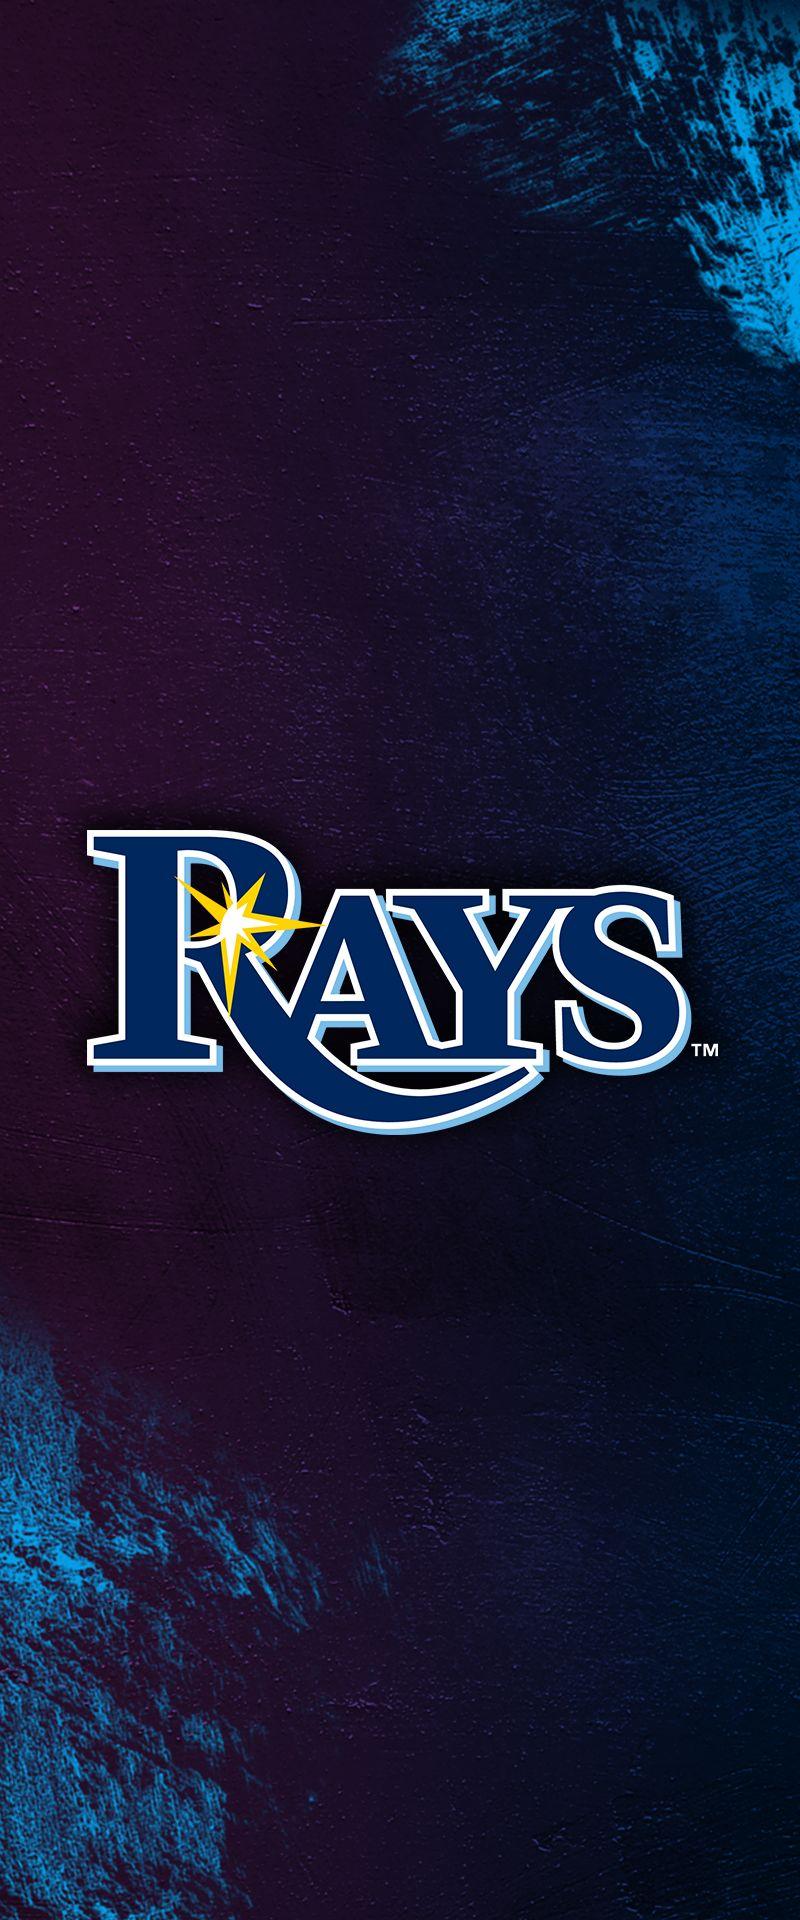 Tampa Bay Rays 2018 Wallpapers - Wallpaper Cave